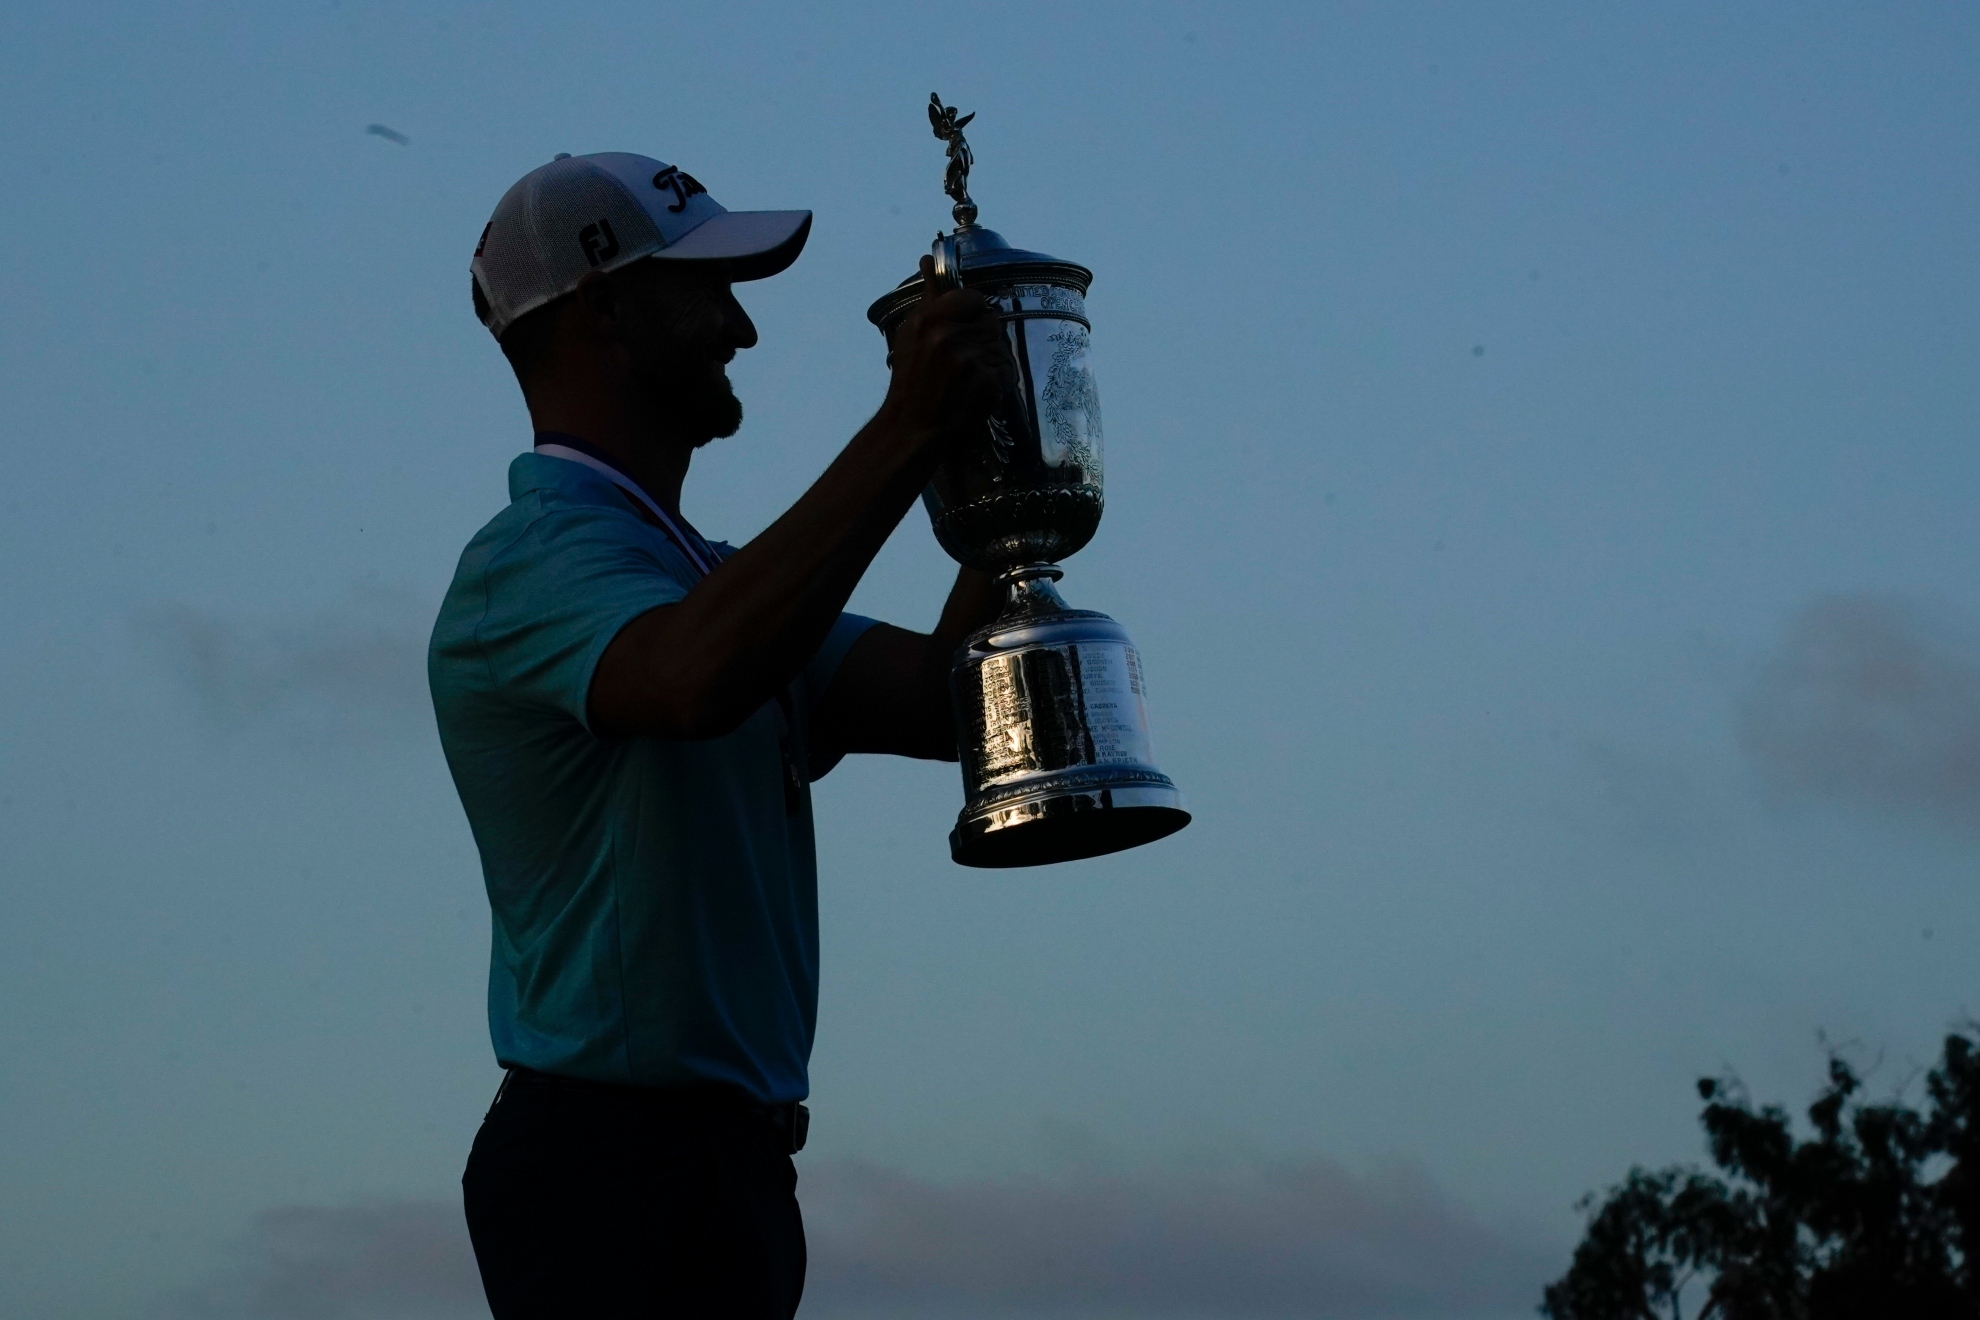 Wyndham Clark crowned champion at 2023 U.S. Open amidst controversy